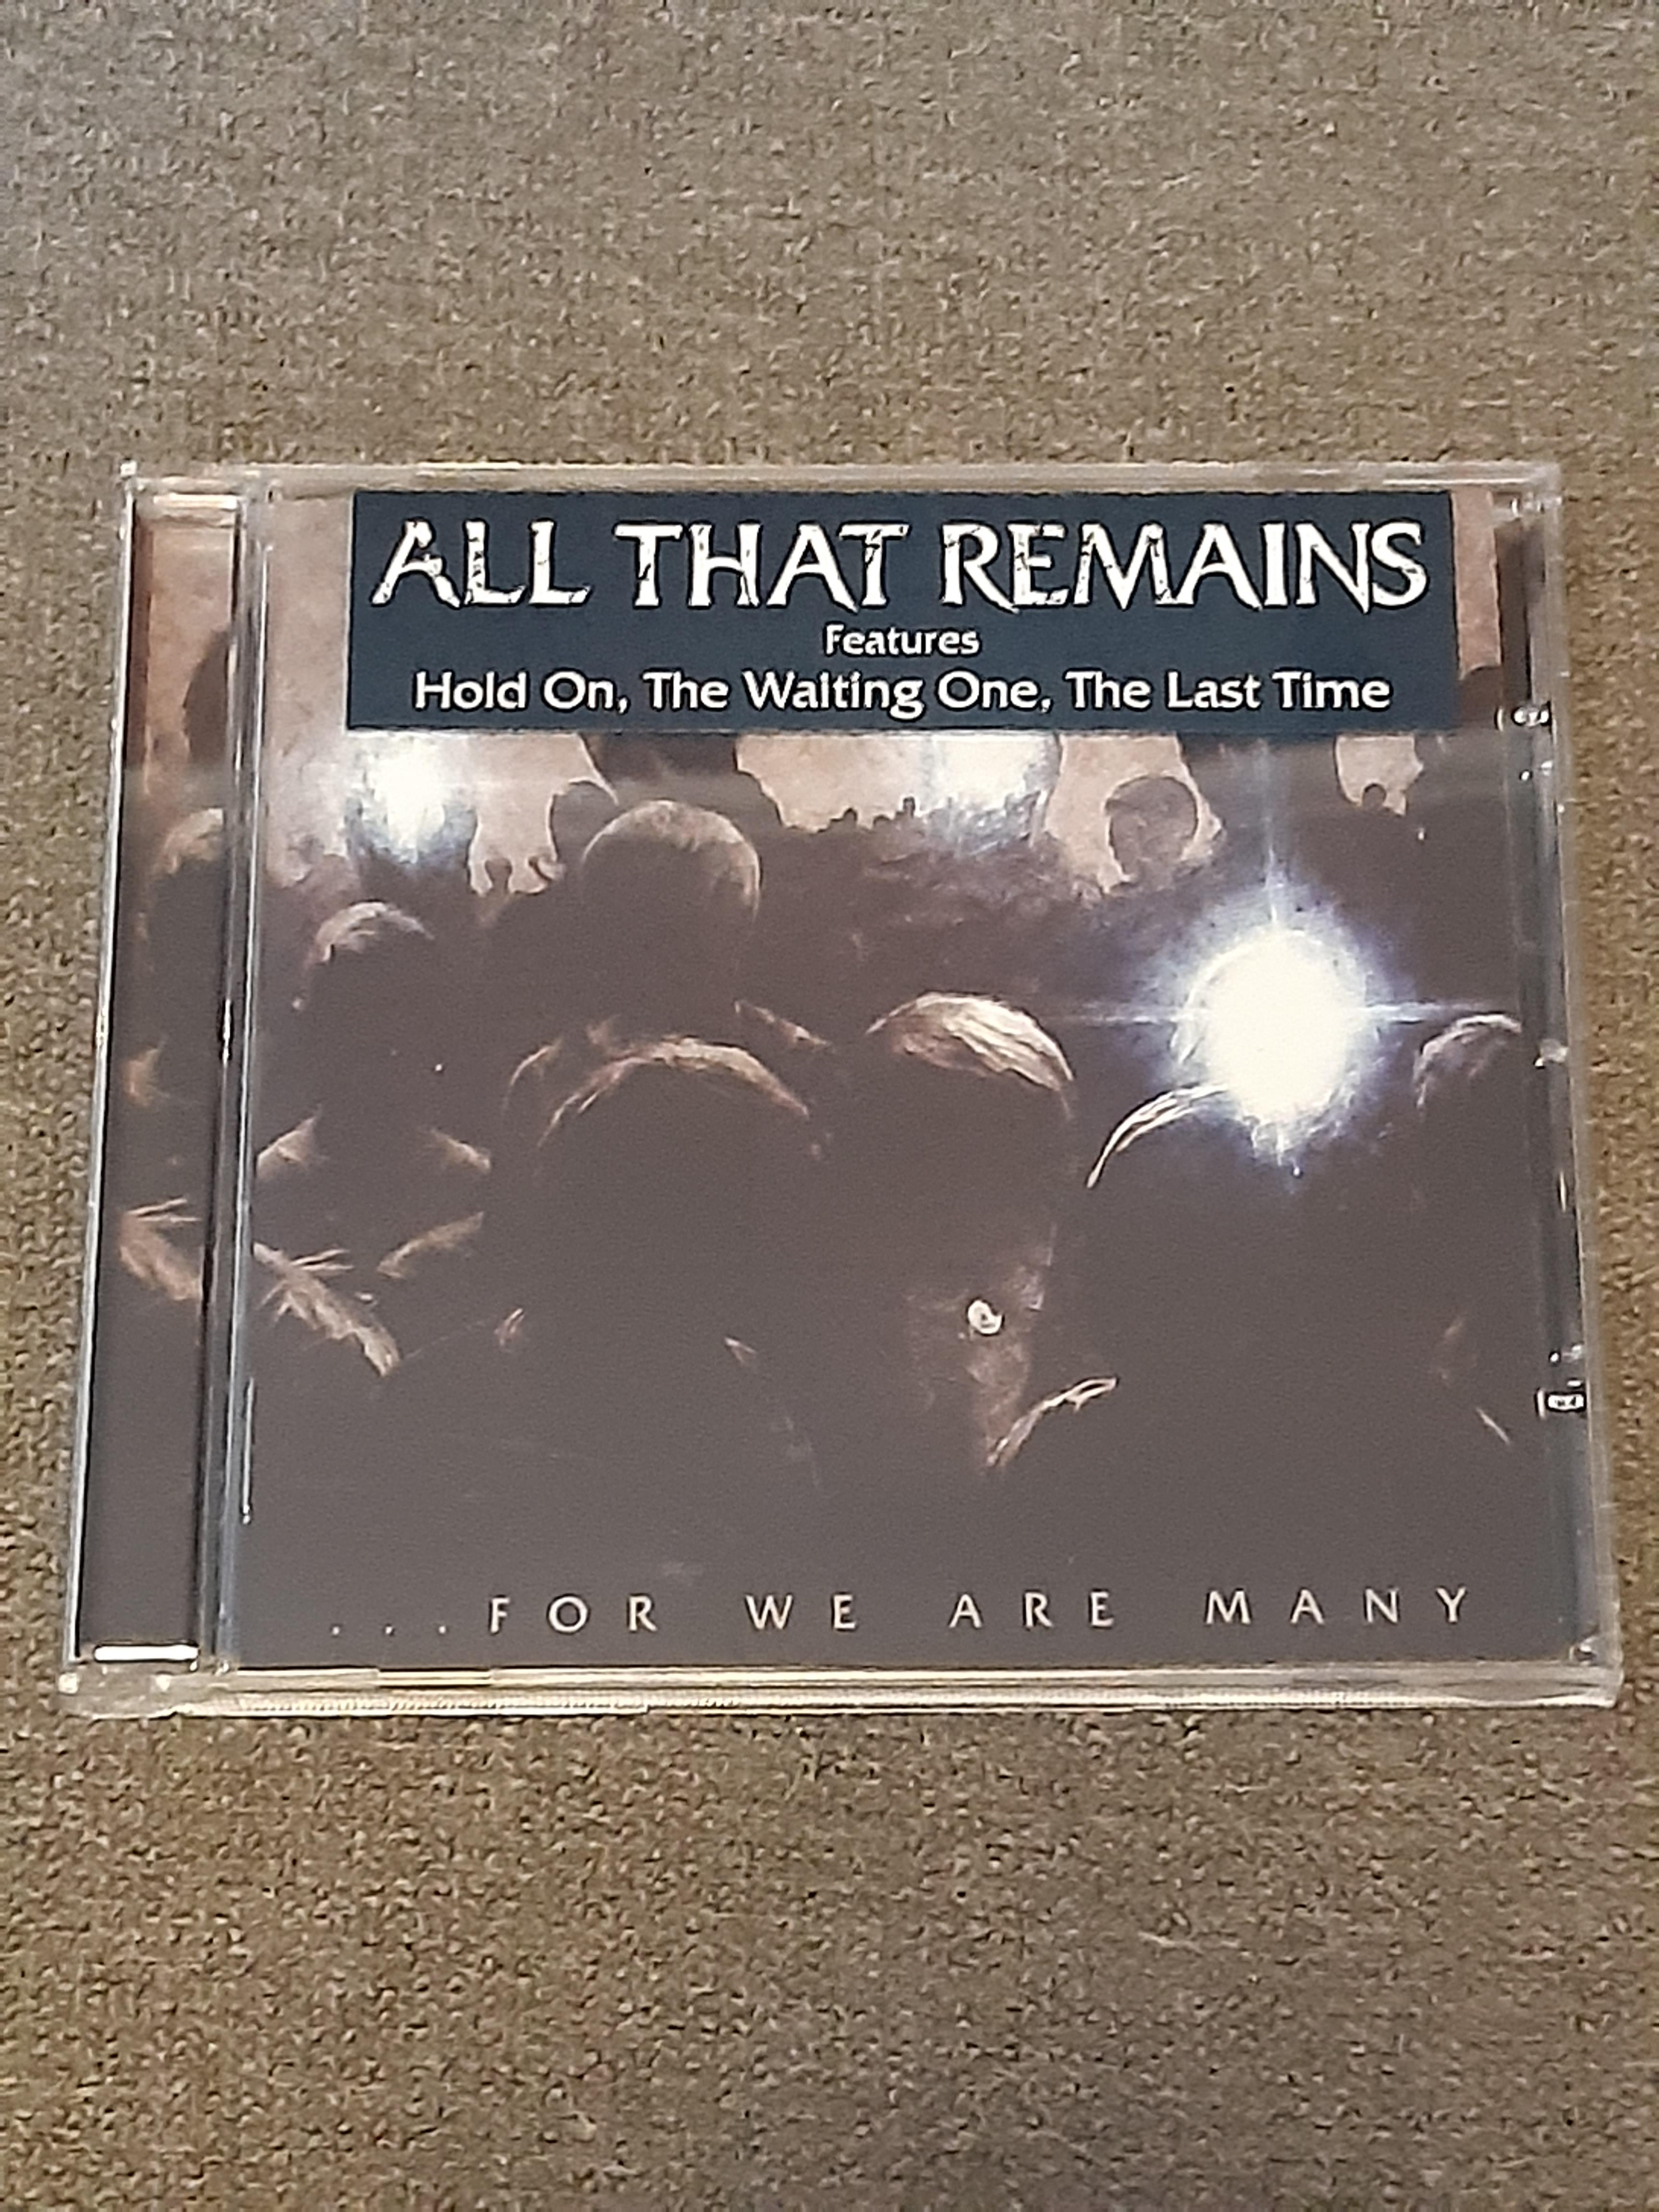 All That Remains - For We Are Many - CD (käytetty)